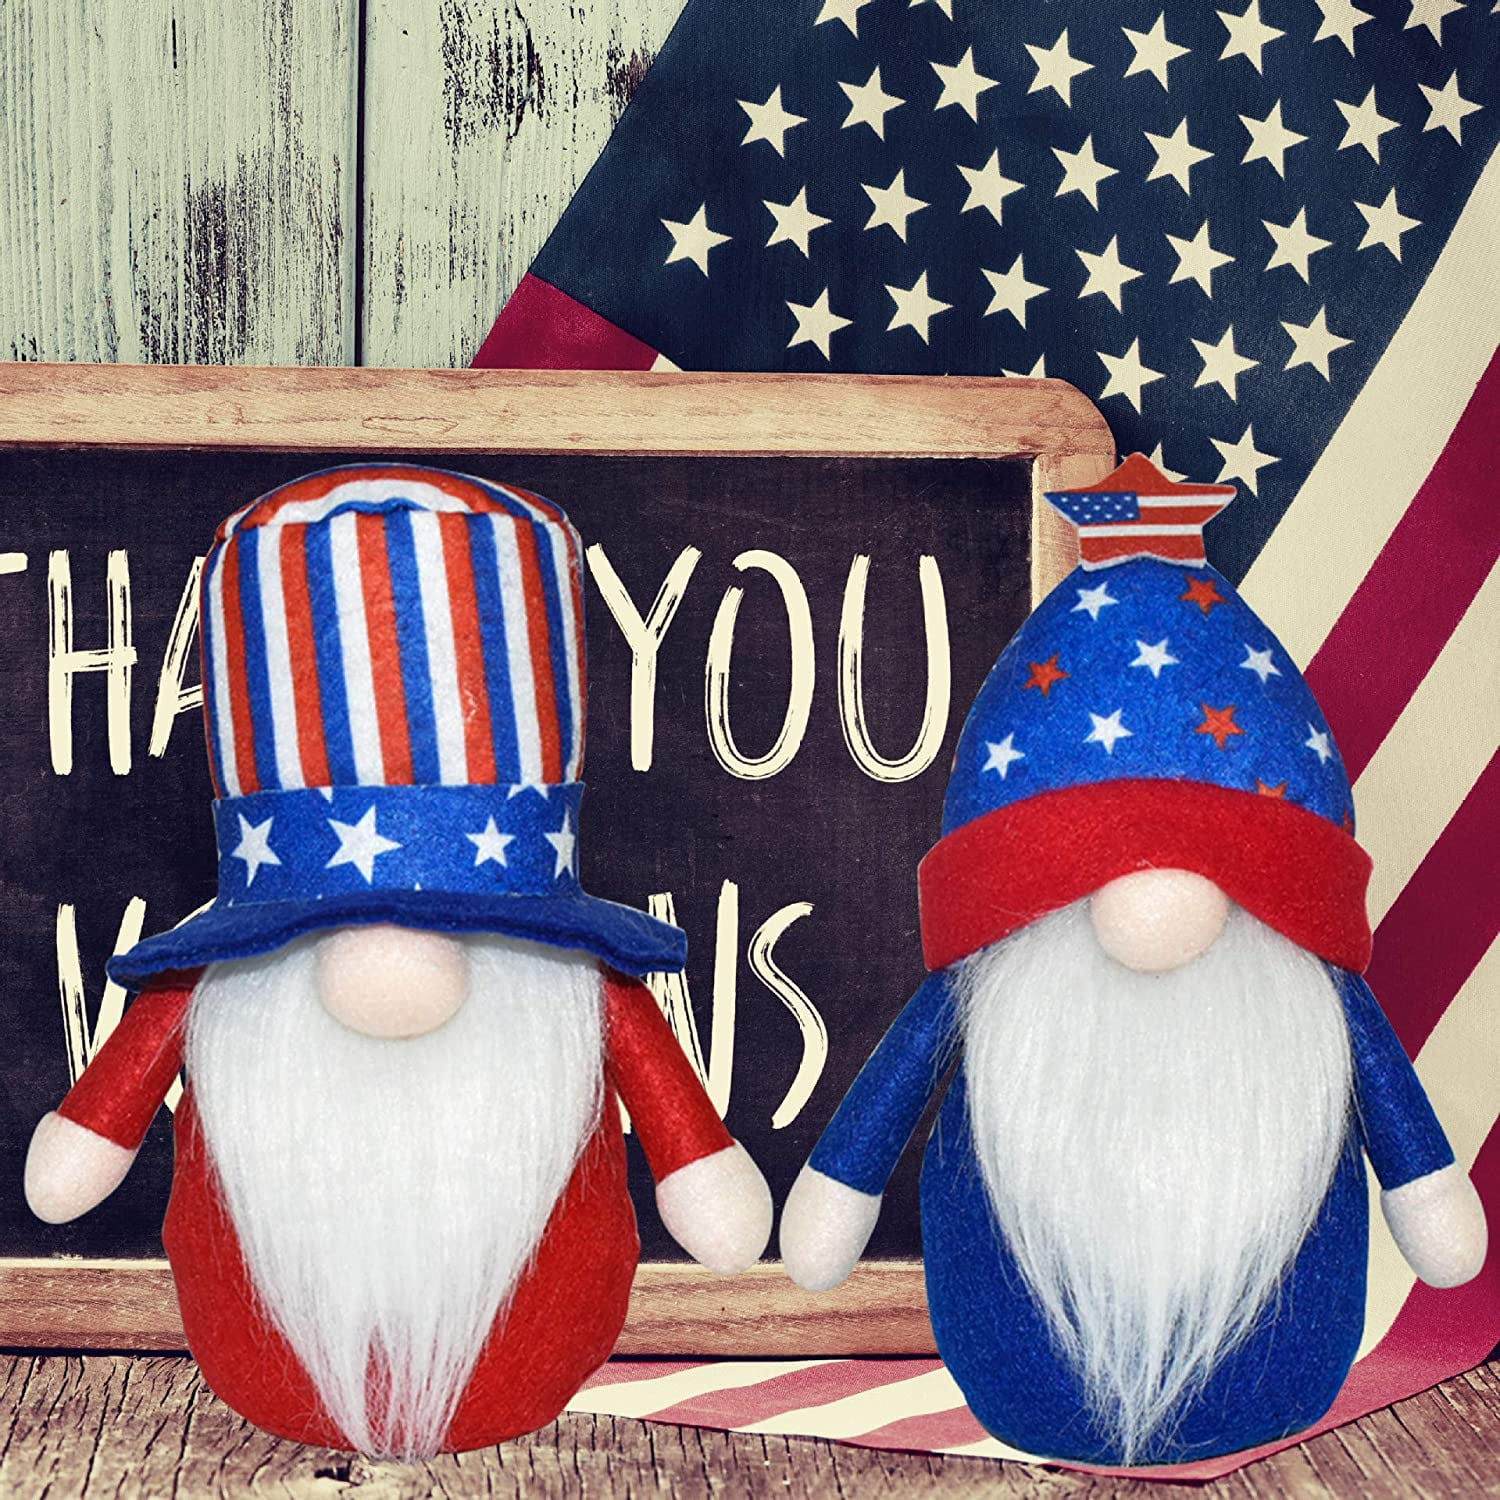 2Pcs Patriotic Gnome Plush Faceless Doll Gnomes Veterans Day Gnome Handmade 4th of July Gnomes Memorial Day President Election Decorations for Household Ornaments 2pcs, Style 1 